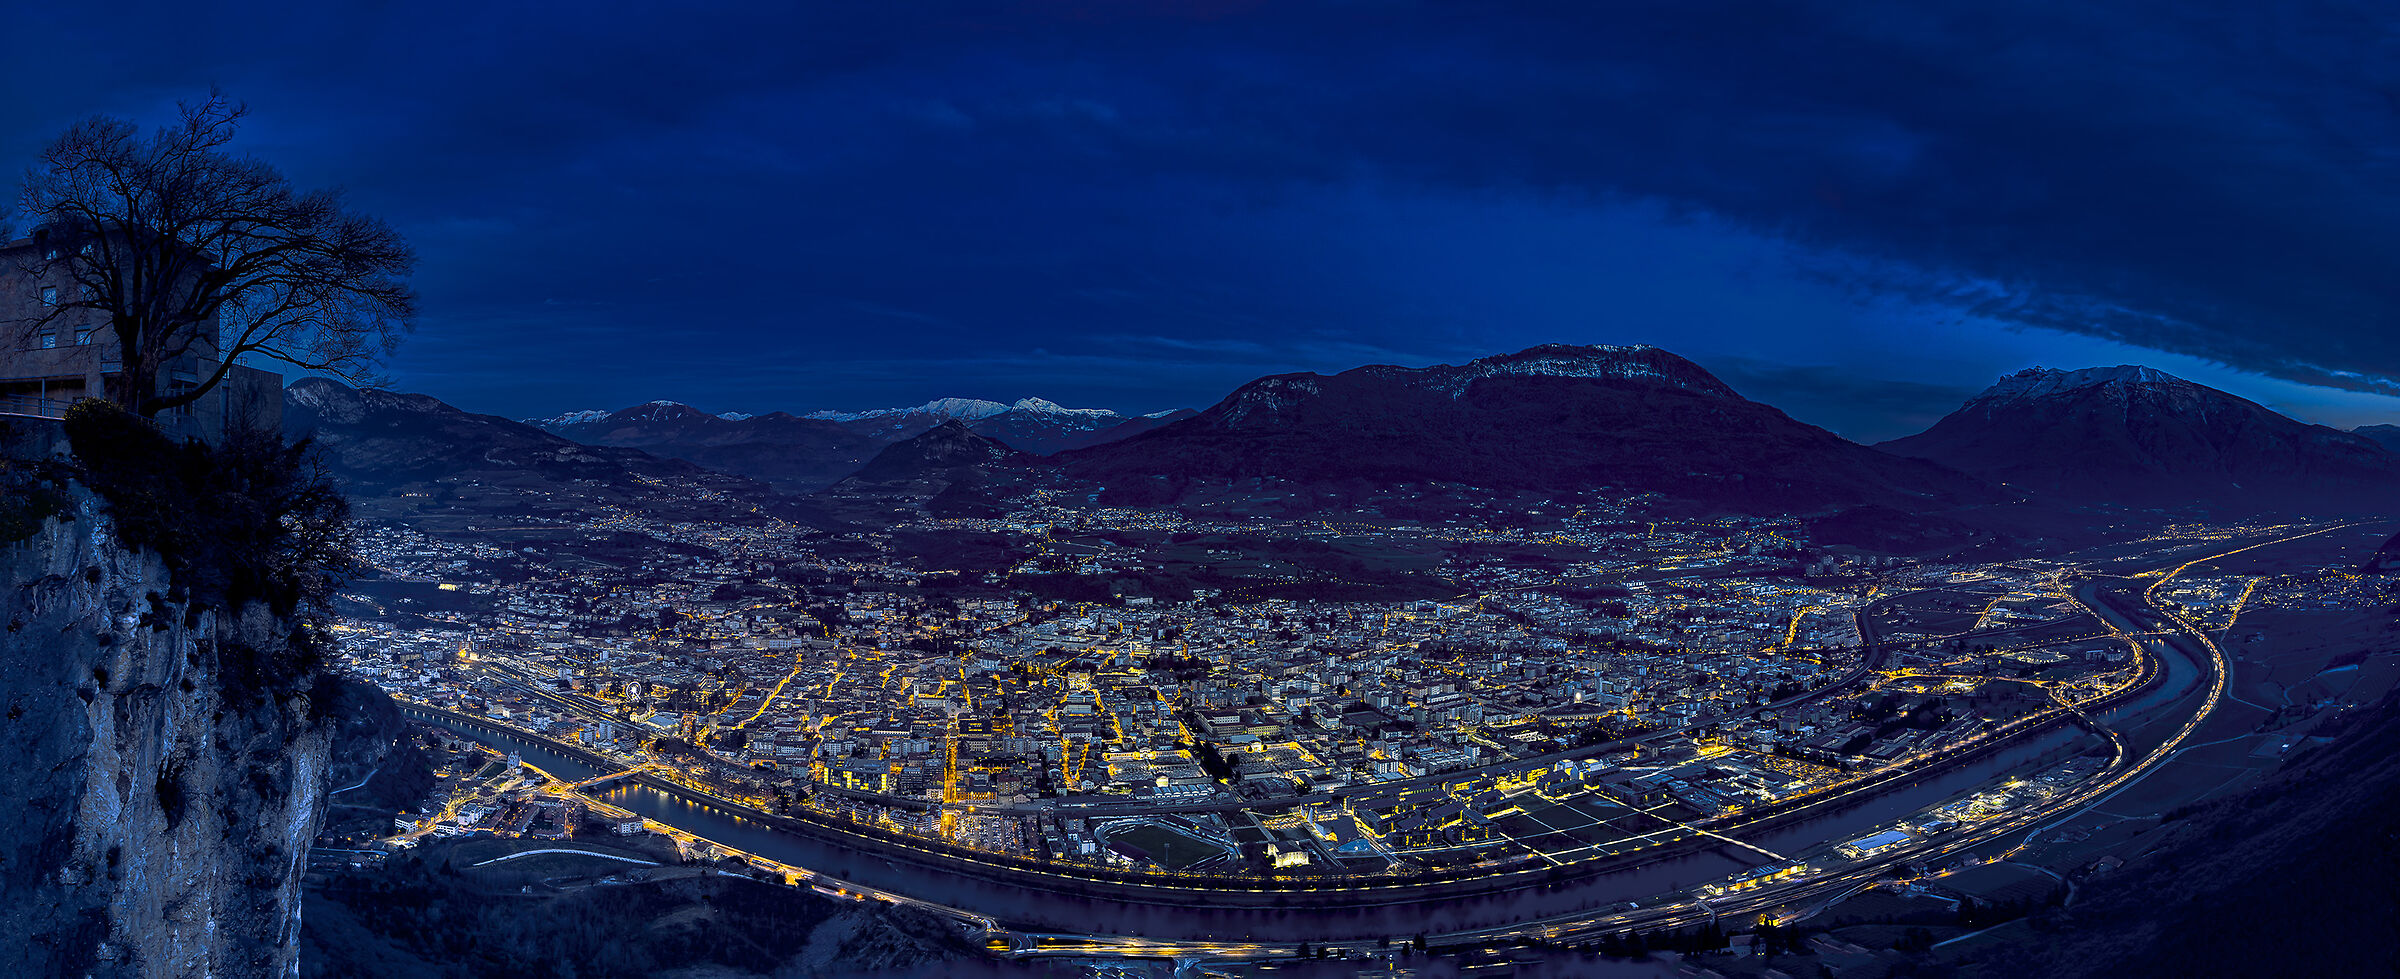 Overview of the city of Trento...